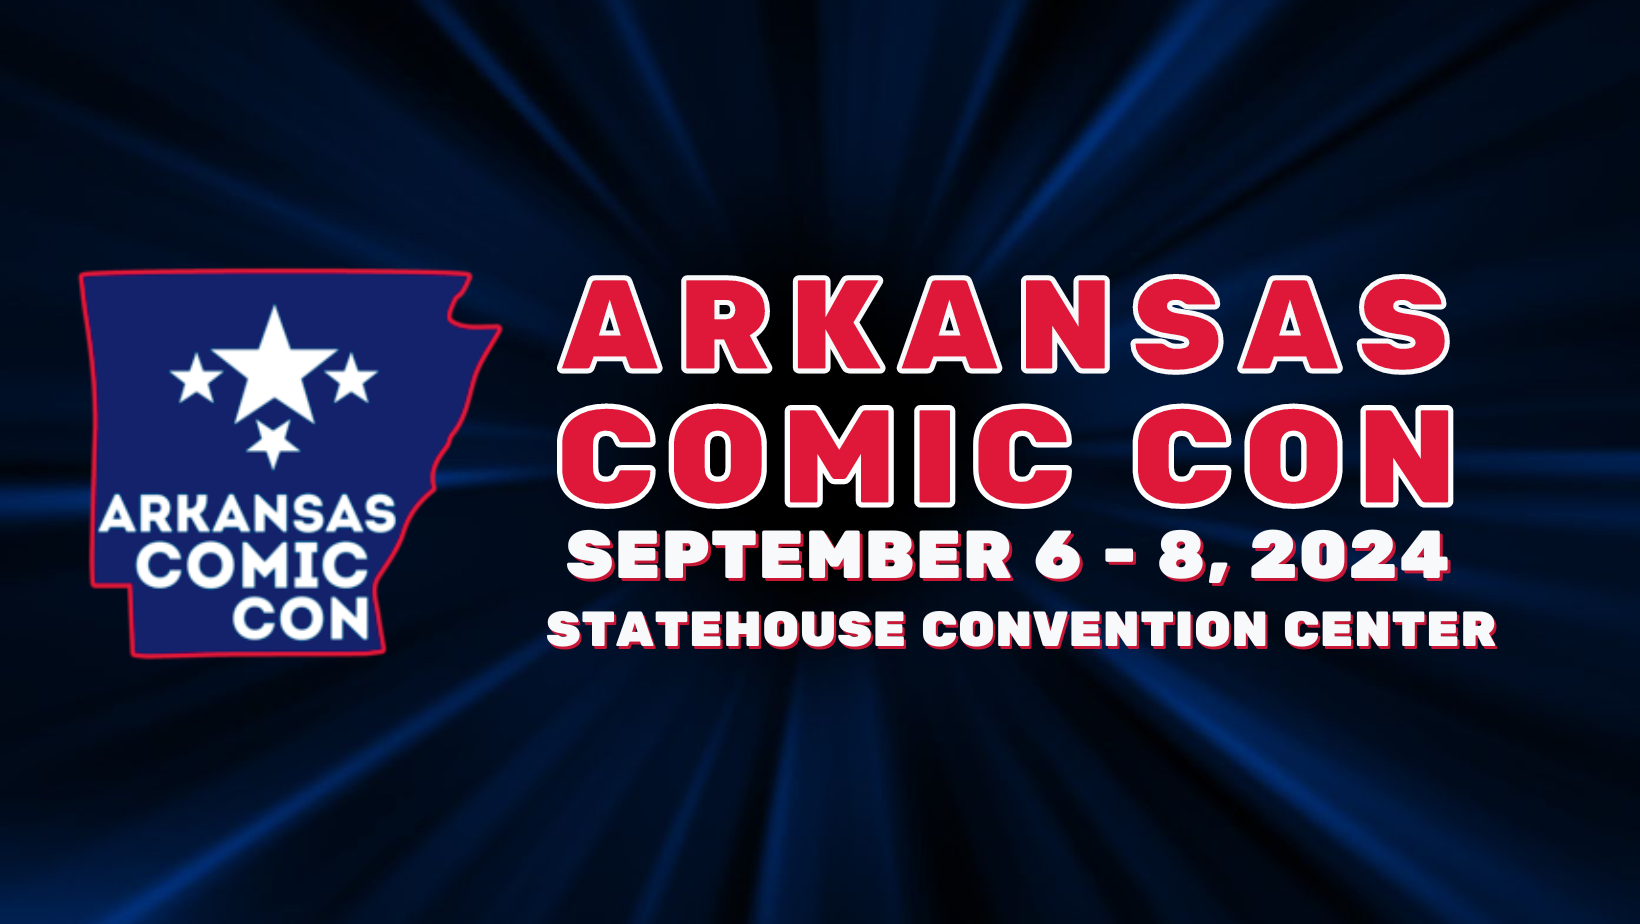 Arkansas Comic Con 2024 Tickets at Statehouse Convention Center in